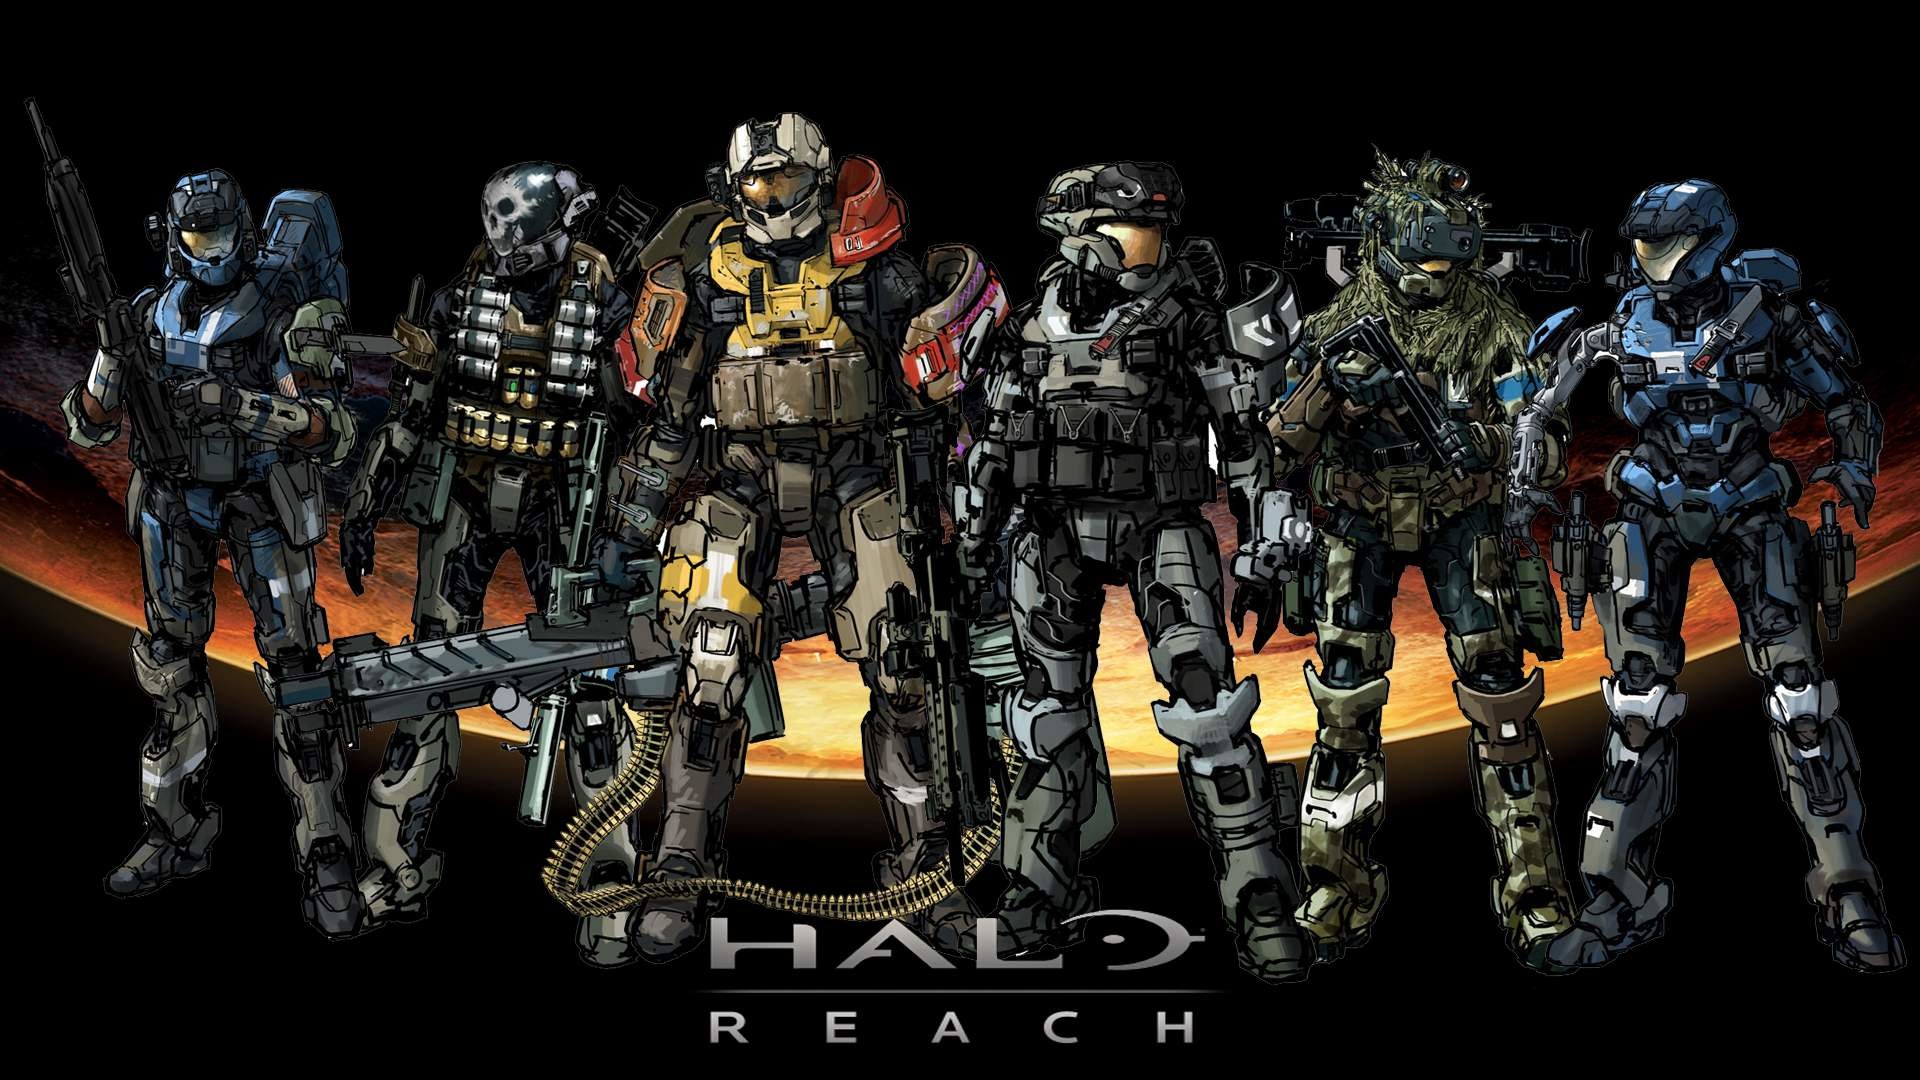 Halo Reach wallpaper (#755855) / Wallbase.cc | Wallpapers. | Pinterest |  Halo reach and Wallpaper